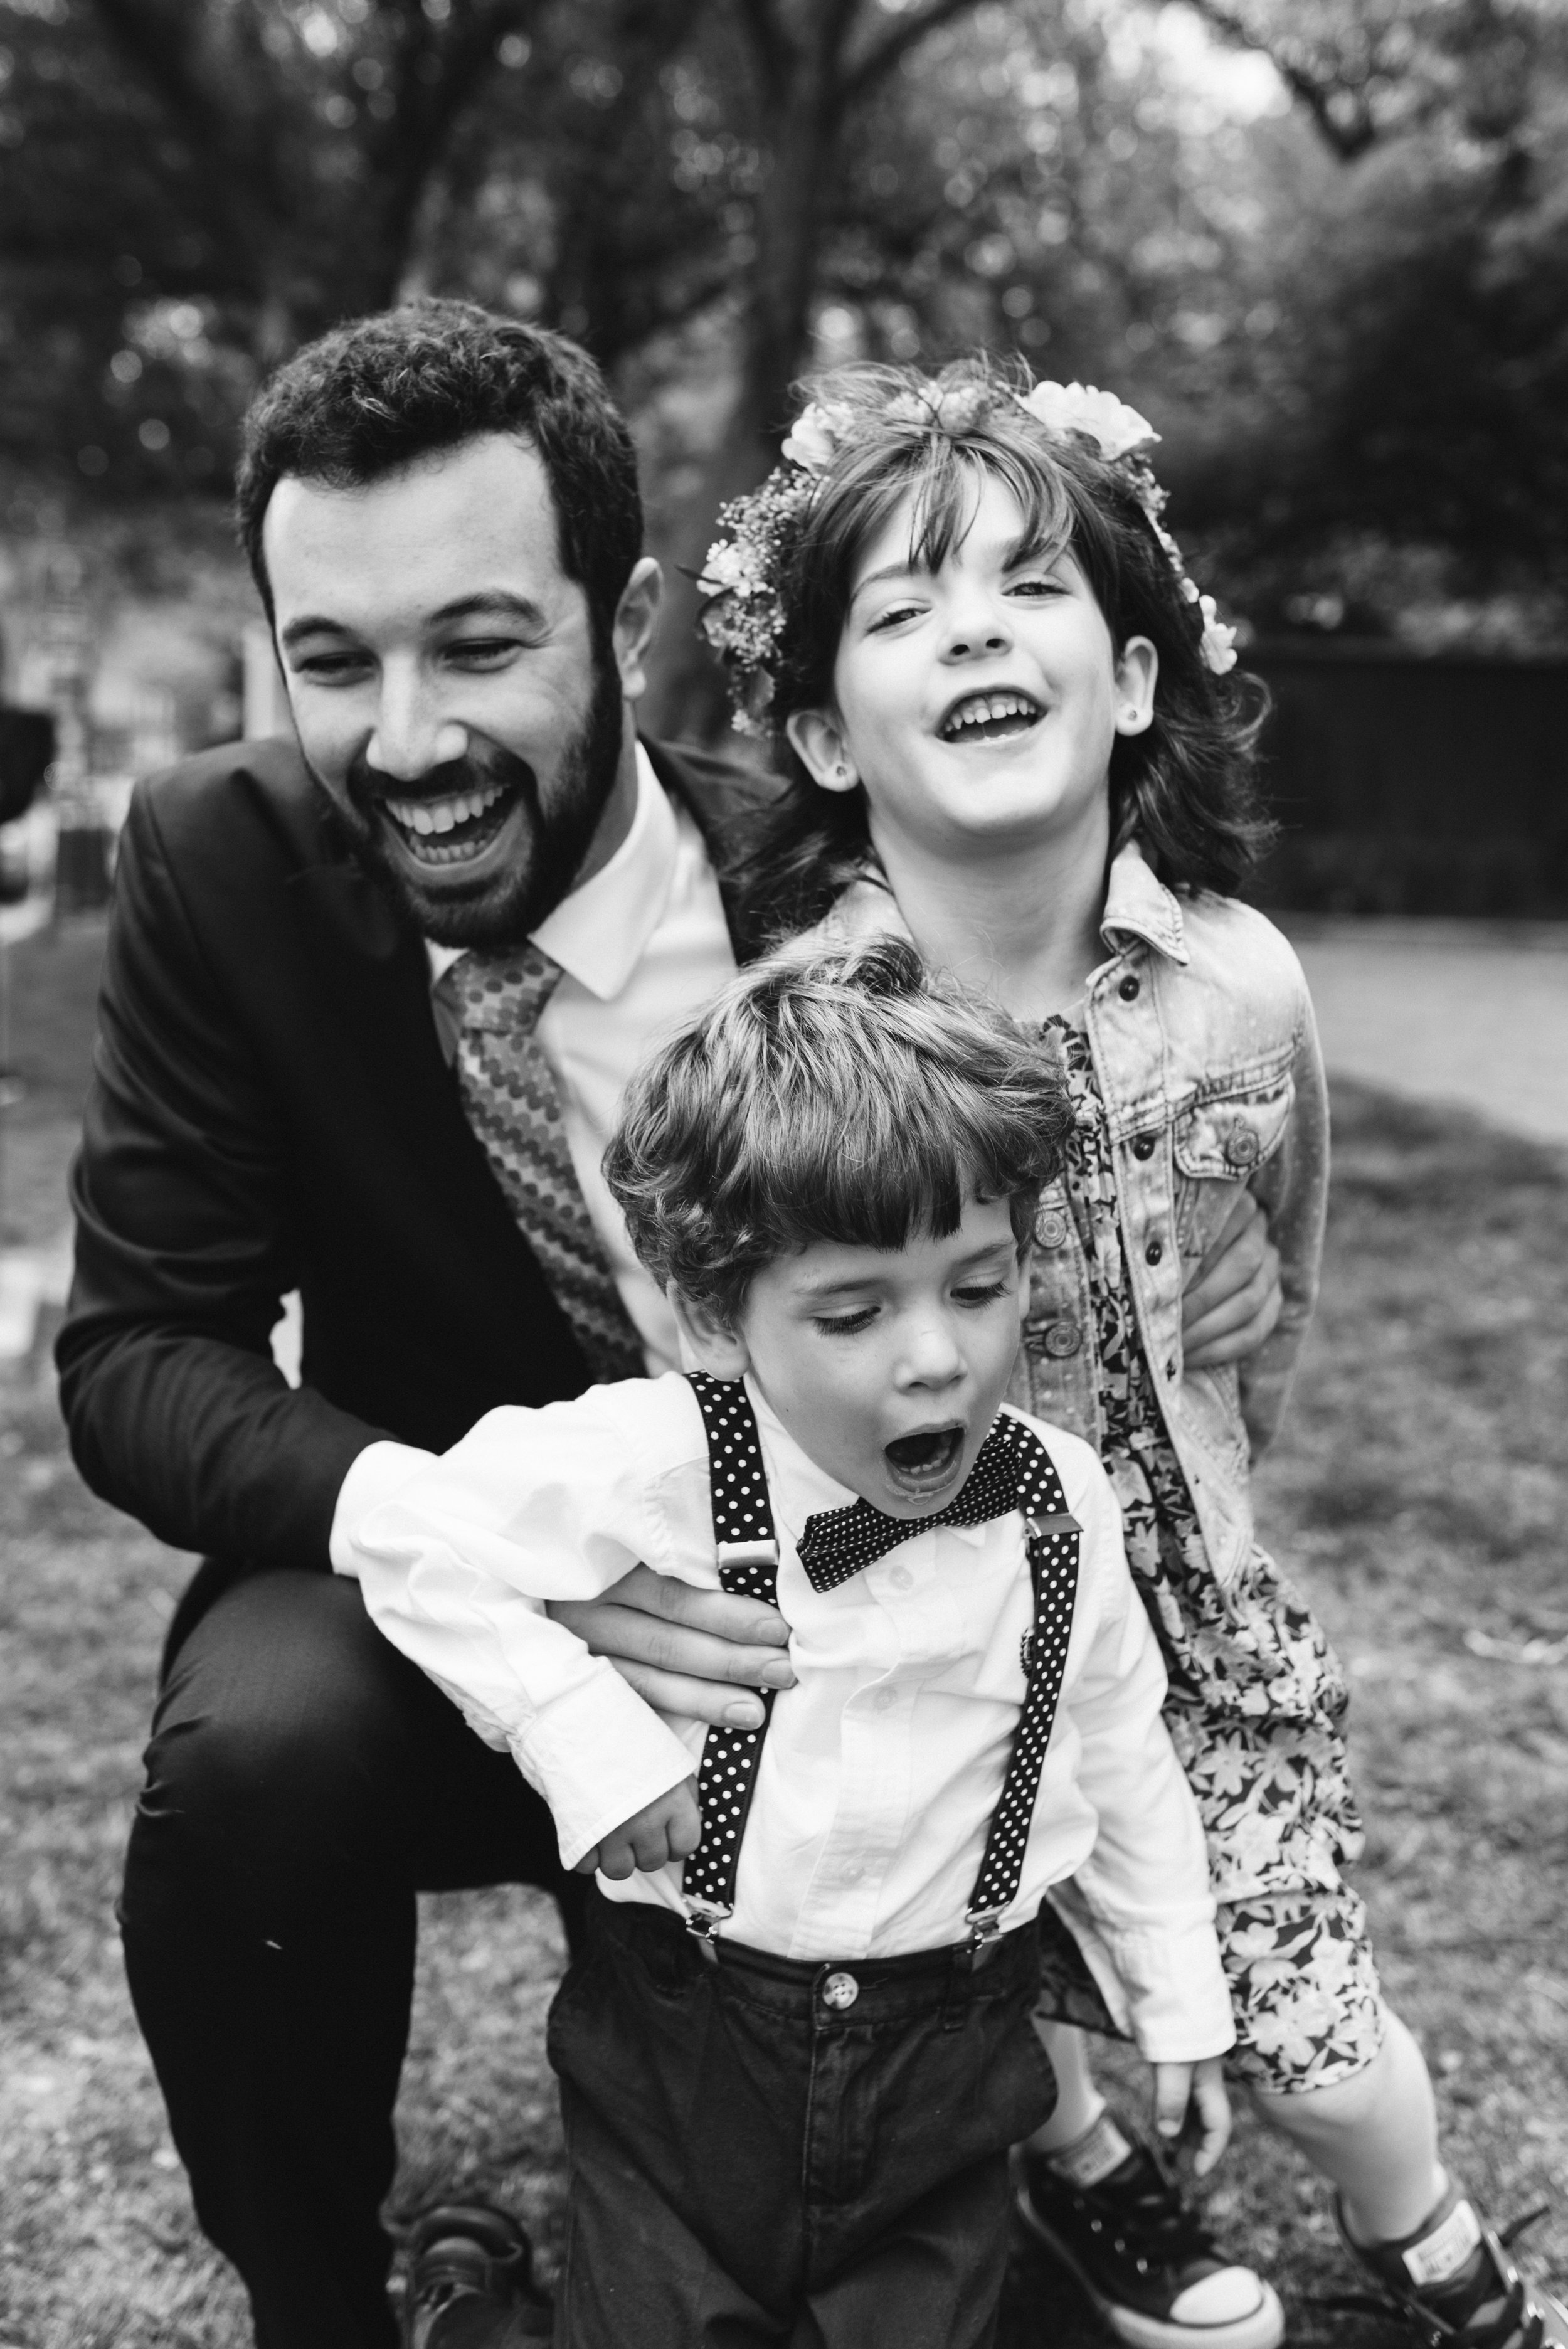  Washington DC, Baltimore Wedding Photographer, Alexandria, Old Town, Jewel Tone, Romantic, Modern, Groom Laughing with Little Boy and Girl, Black and White Photo 